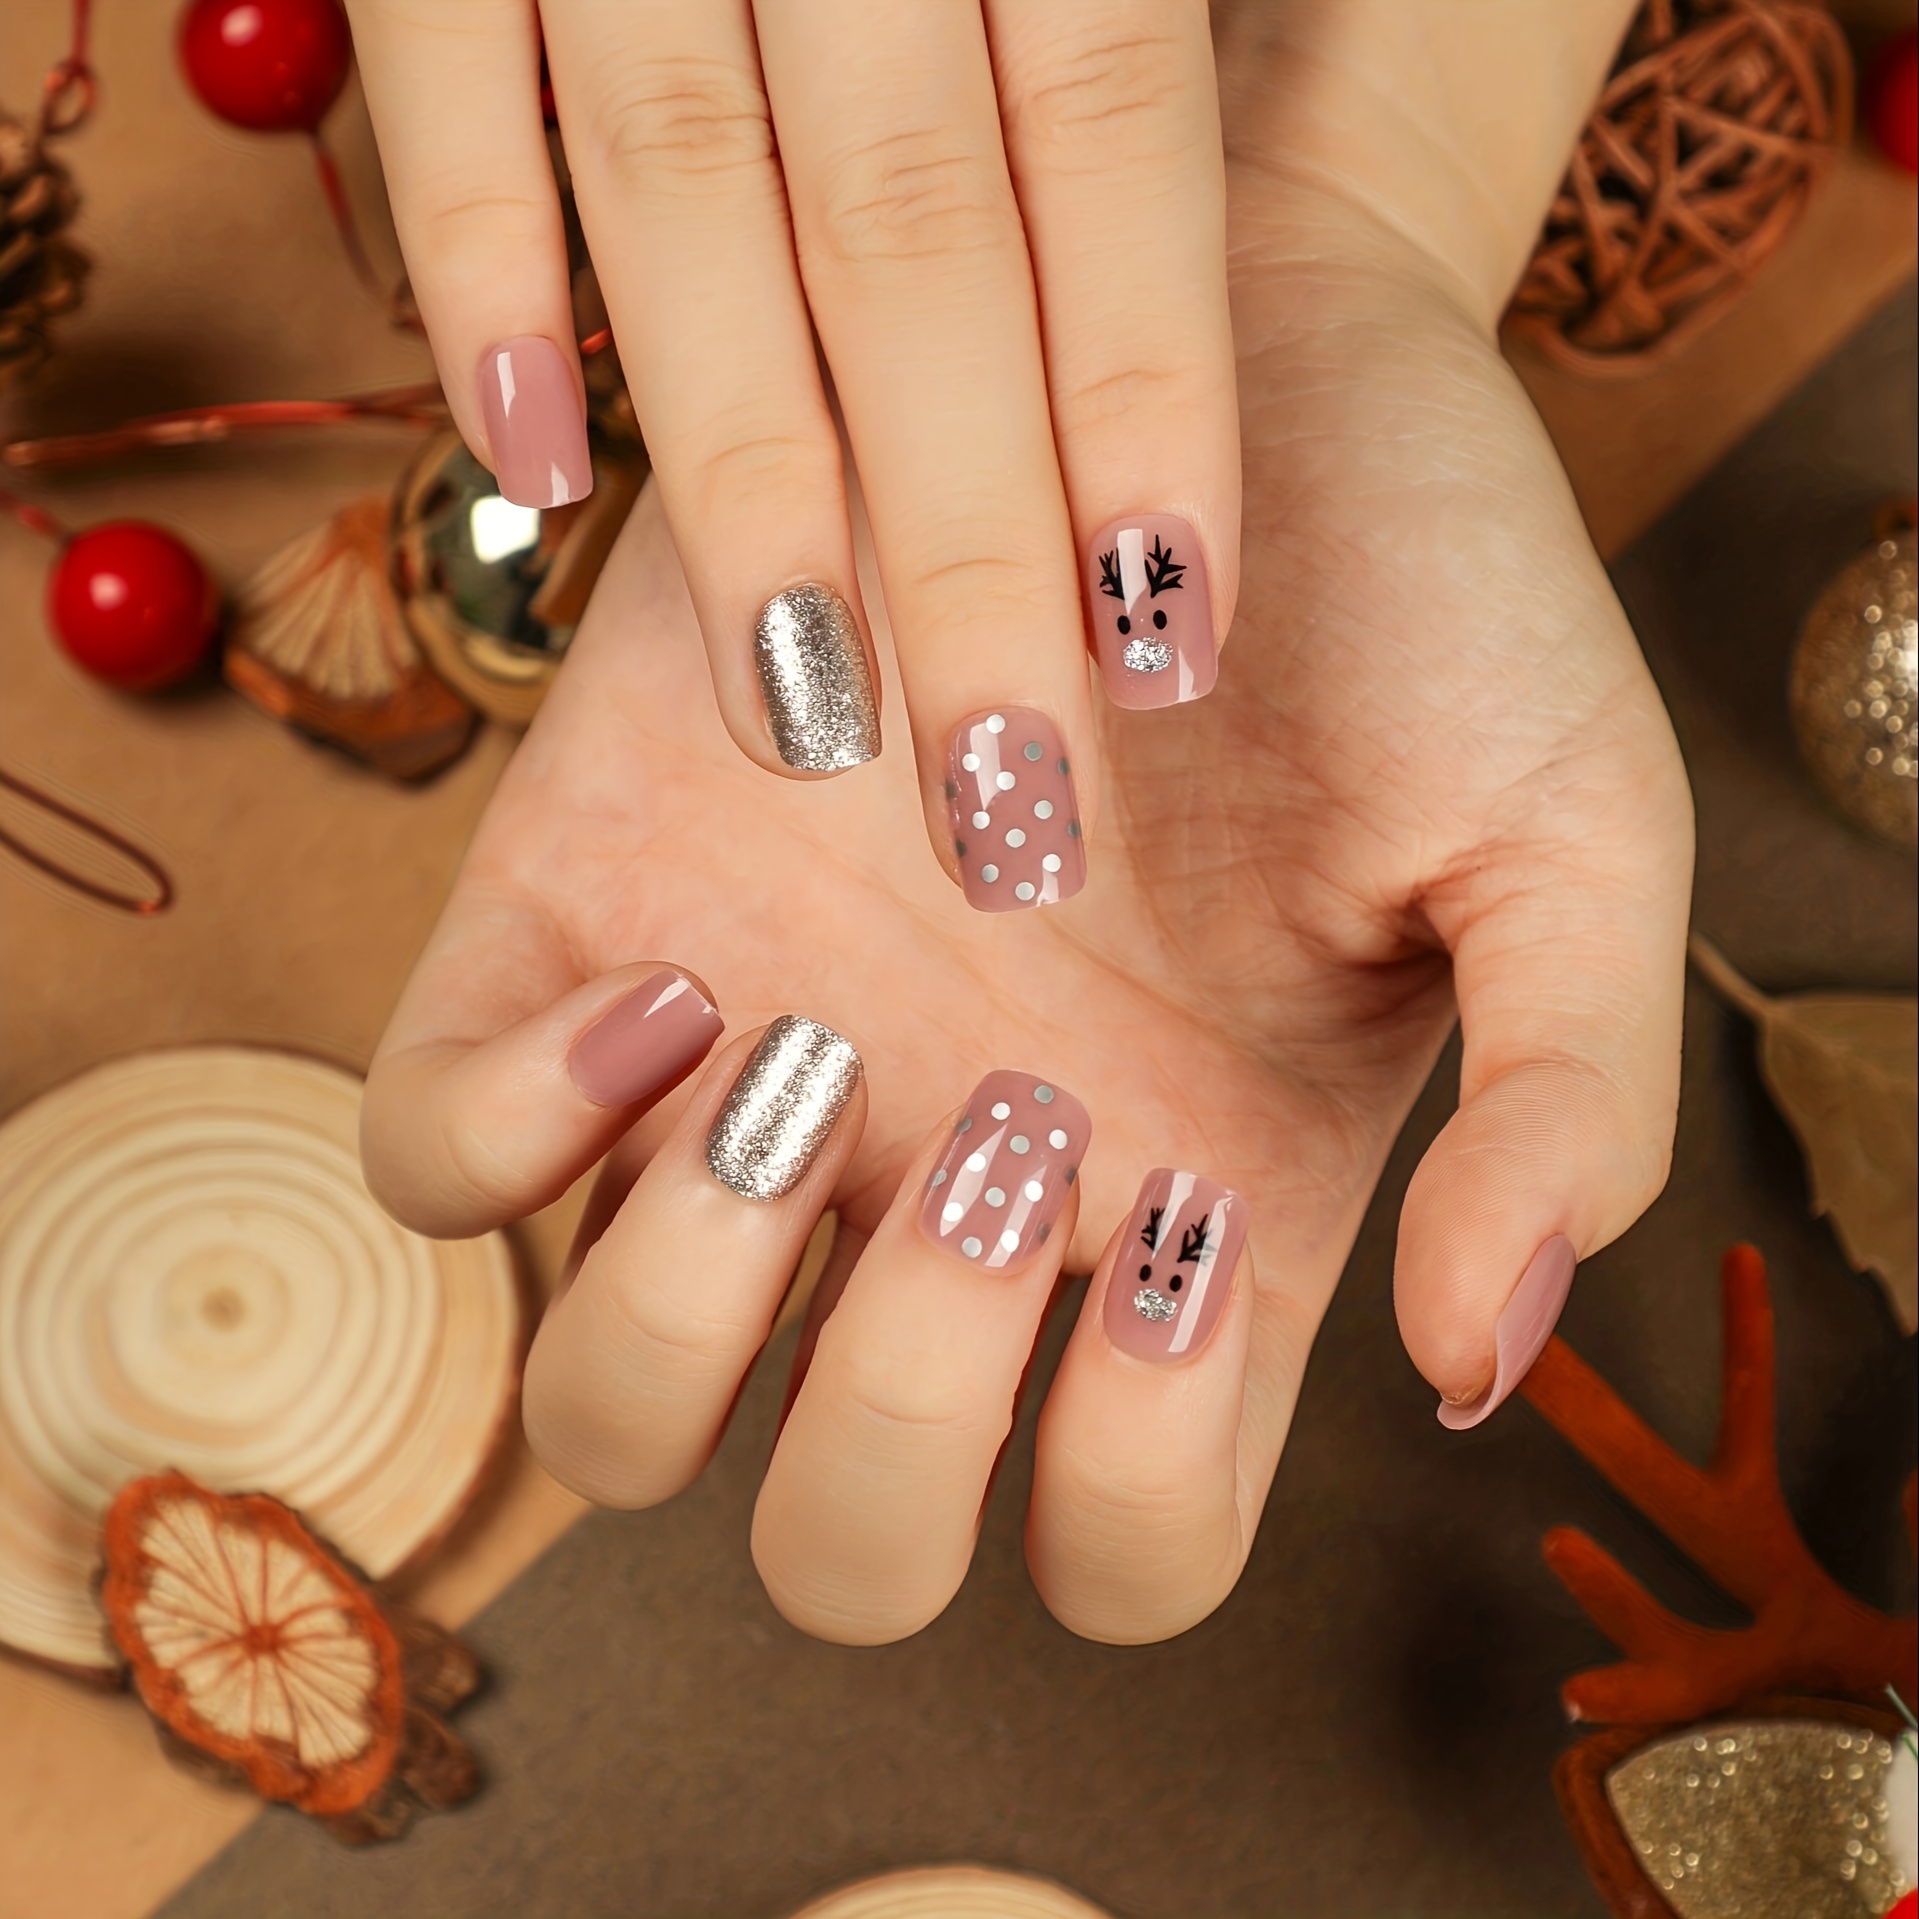 50 Best Holiday Nail Art Ideas & Designs : Green, Red and White Christmas  Nails